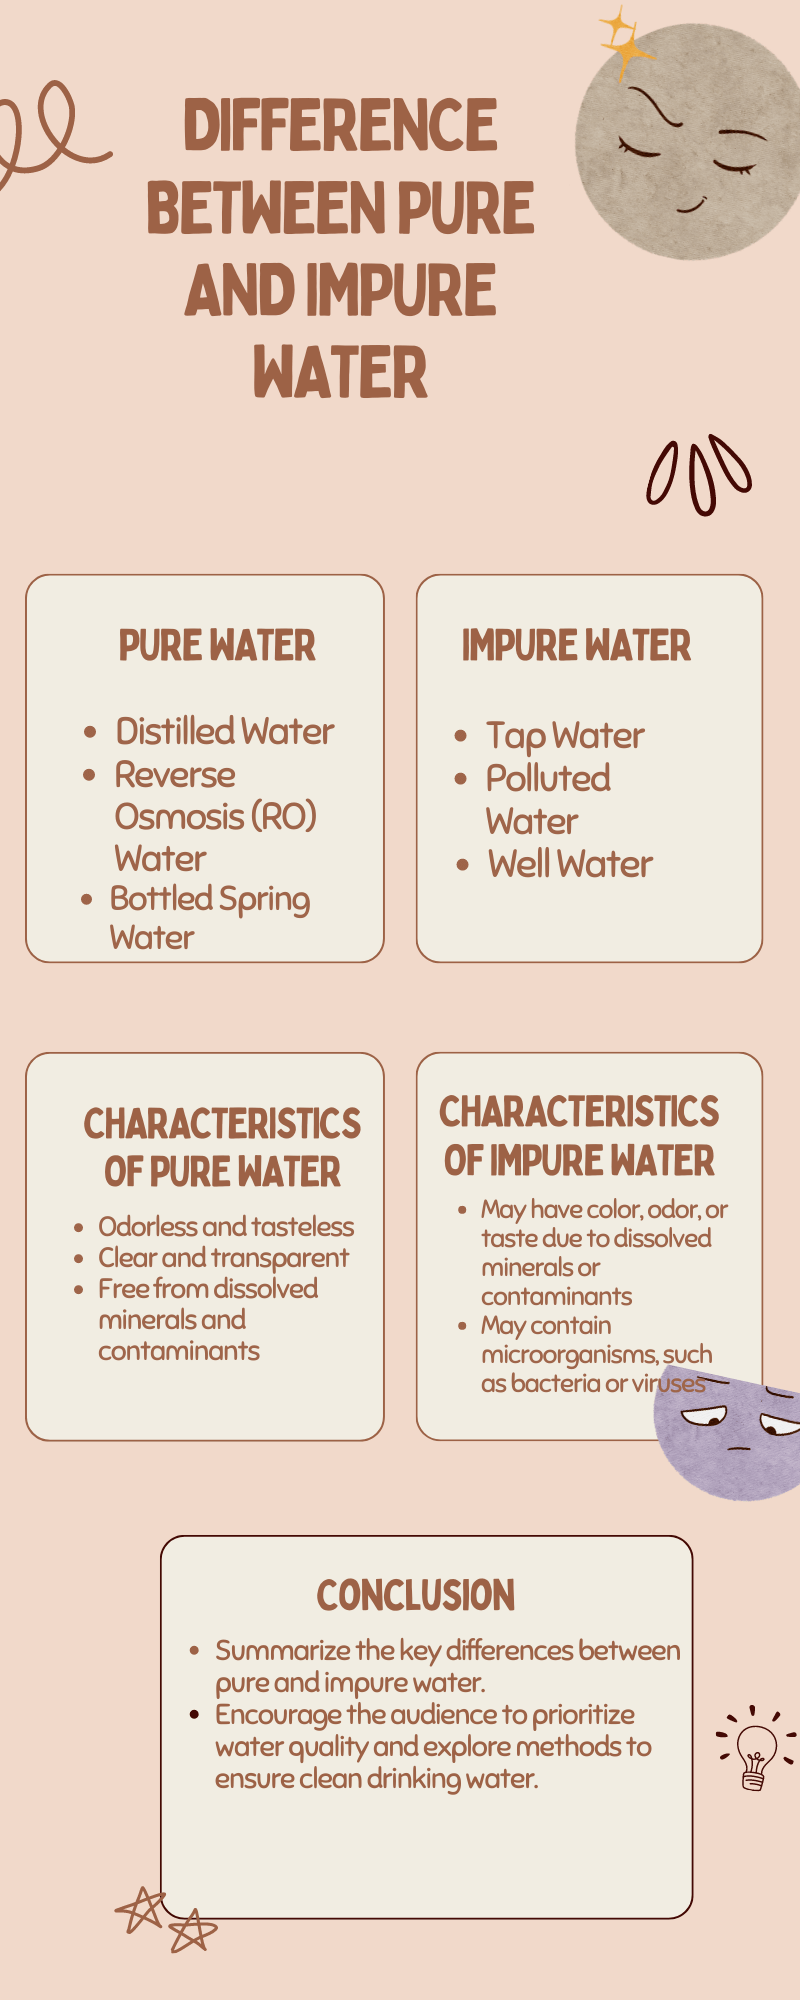 Difference Between Pure And Impure Water - infographic